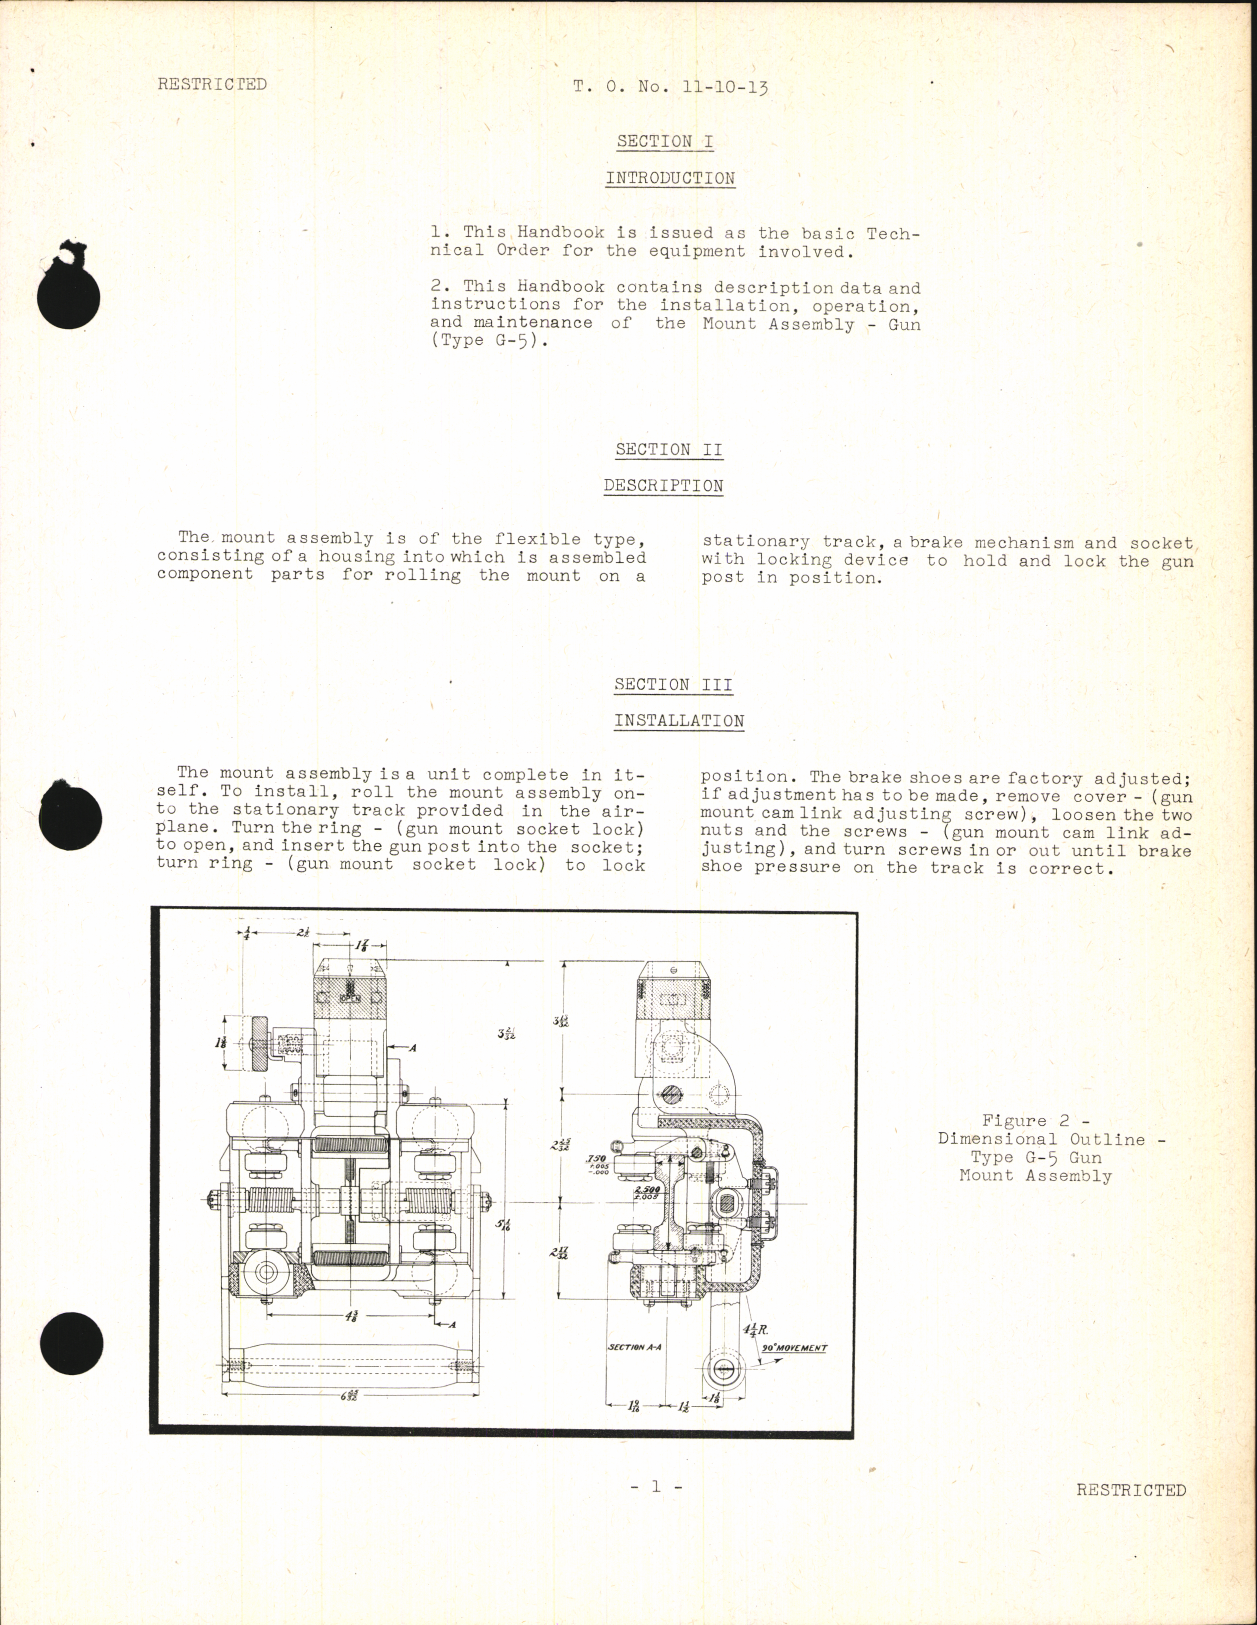 Sample page 5 from AirCorps Library document: Handbook of Instructions with Parts Catalog for Type G-5 Gun Mounts